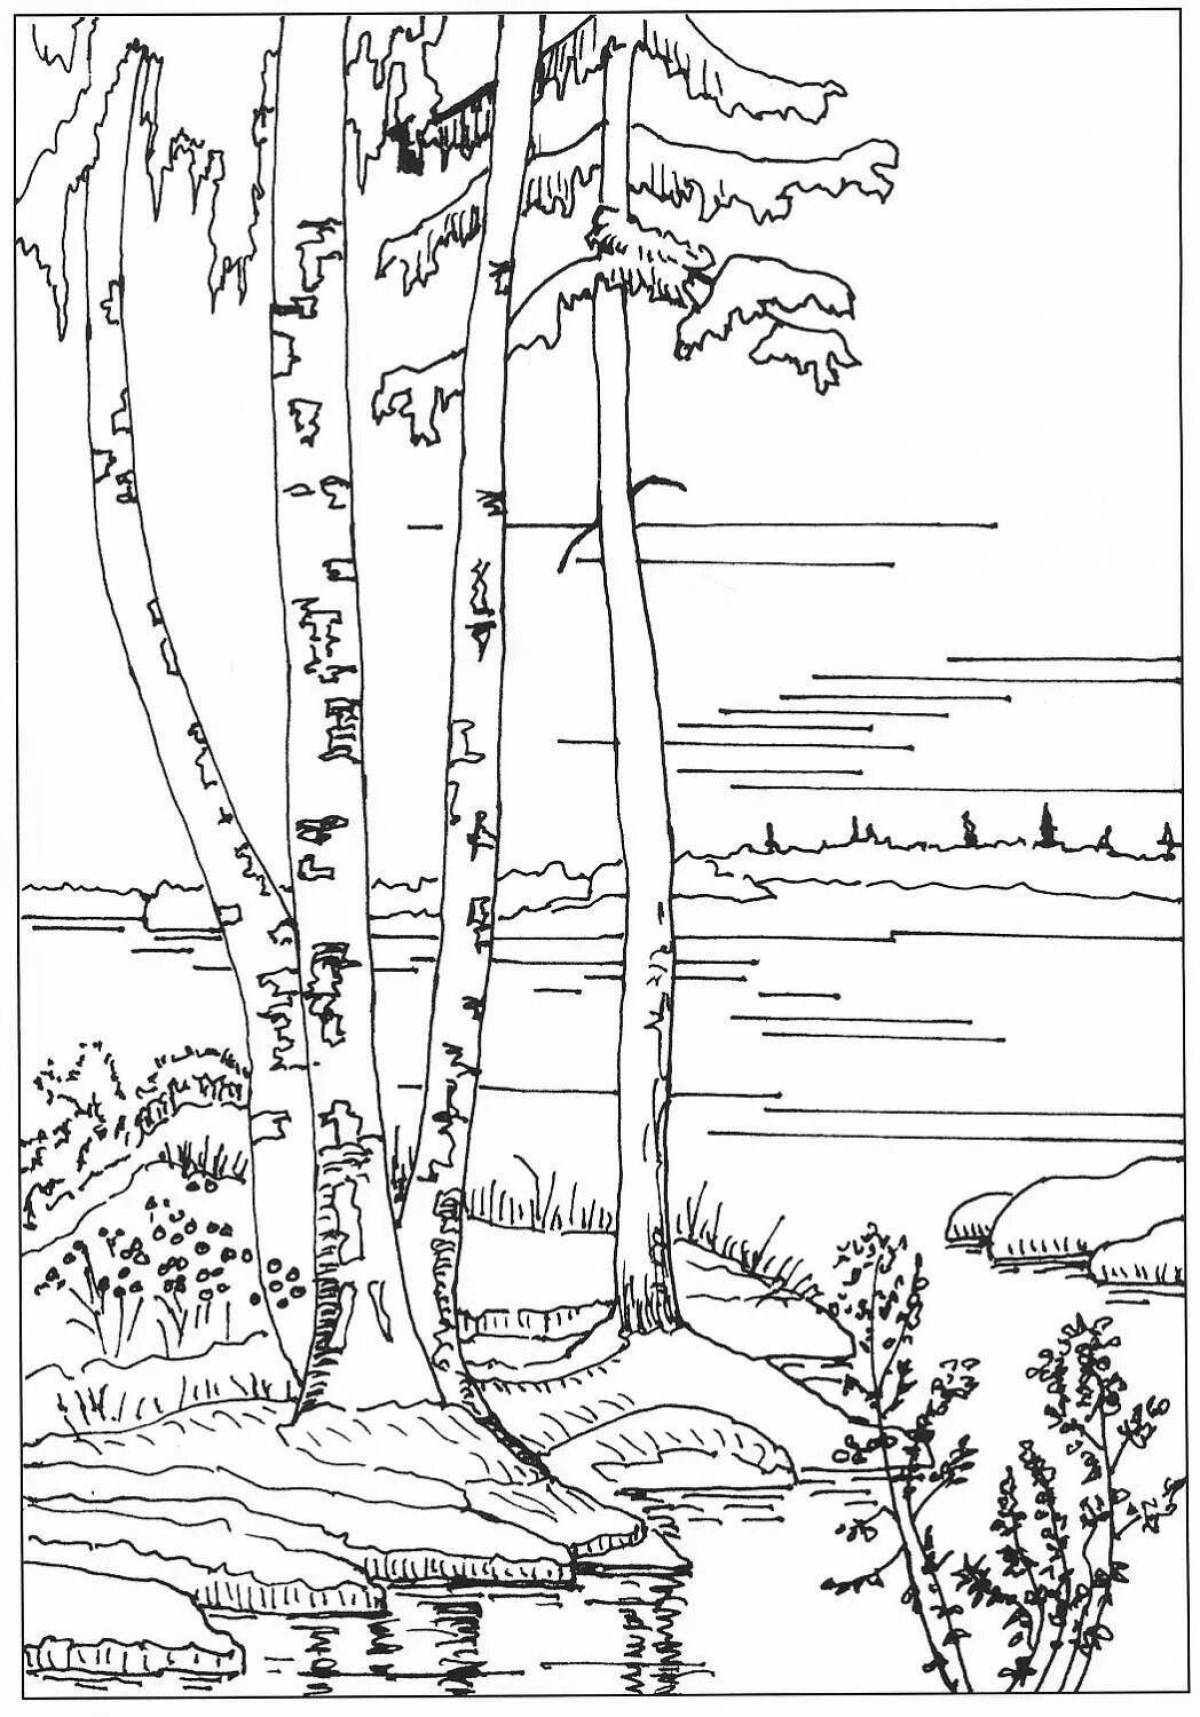 Awesome grove coloring page for kids